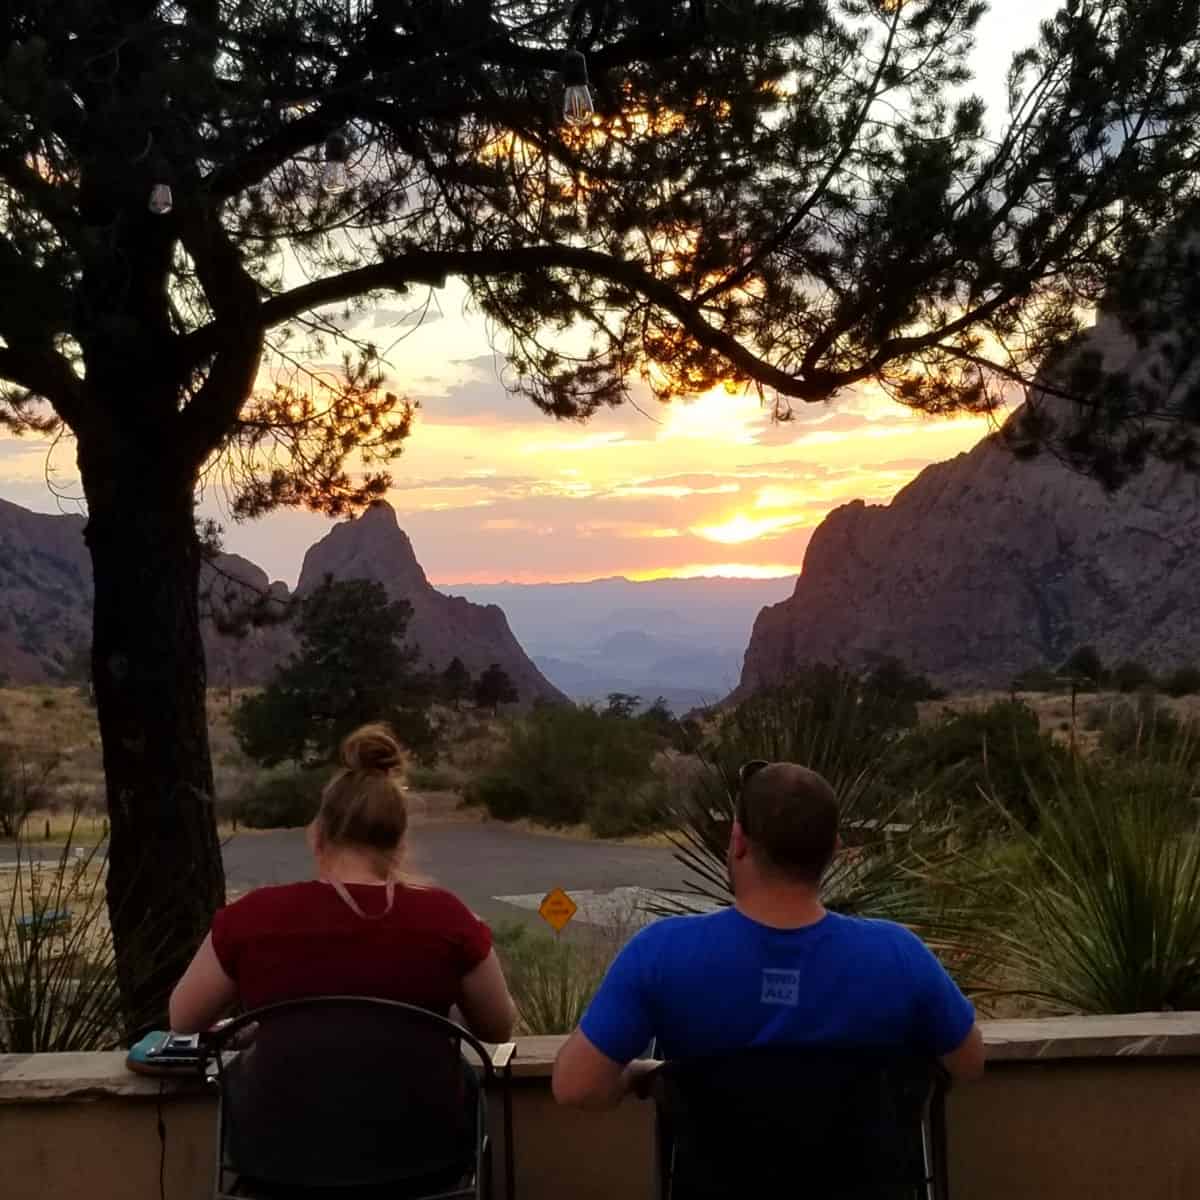 Sunset at Chisos Mountain Lodge at Big Bend National Park in Texas